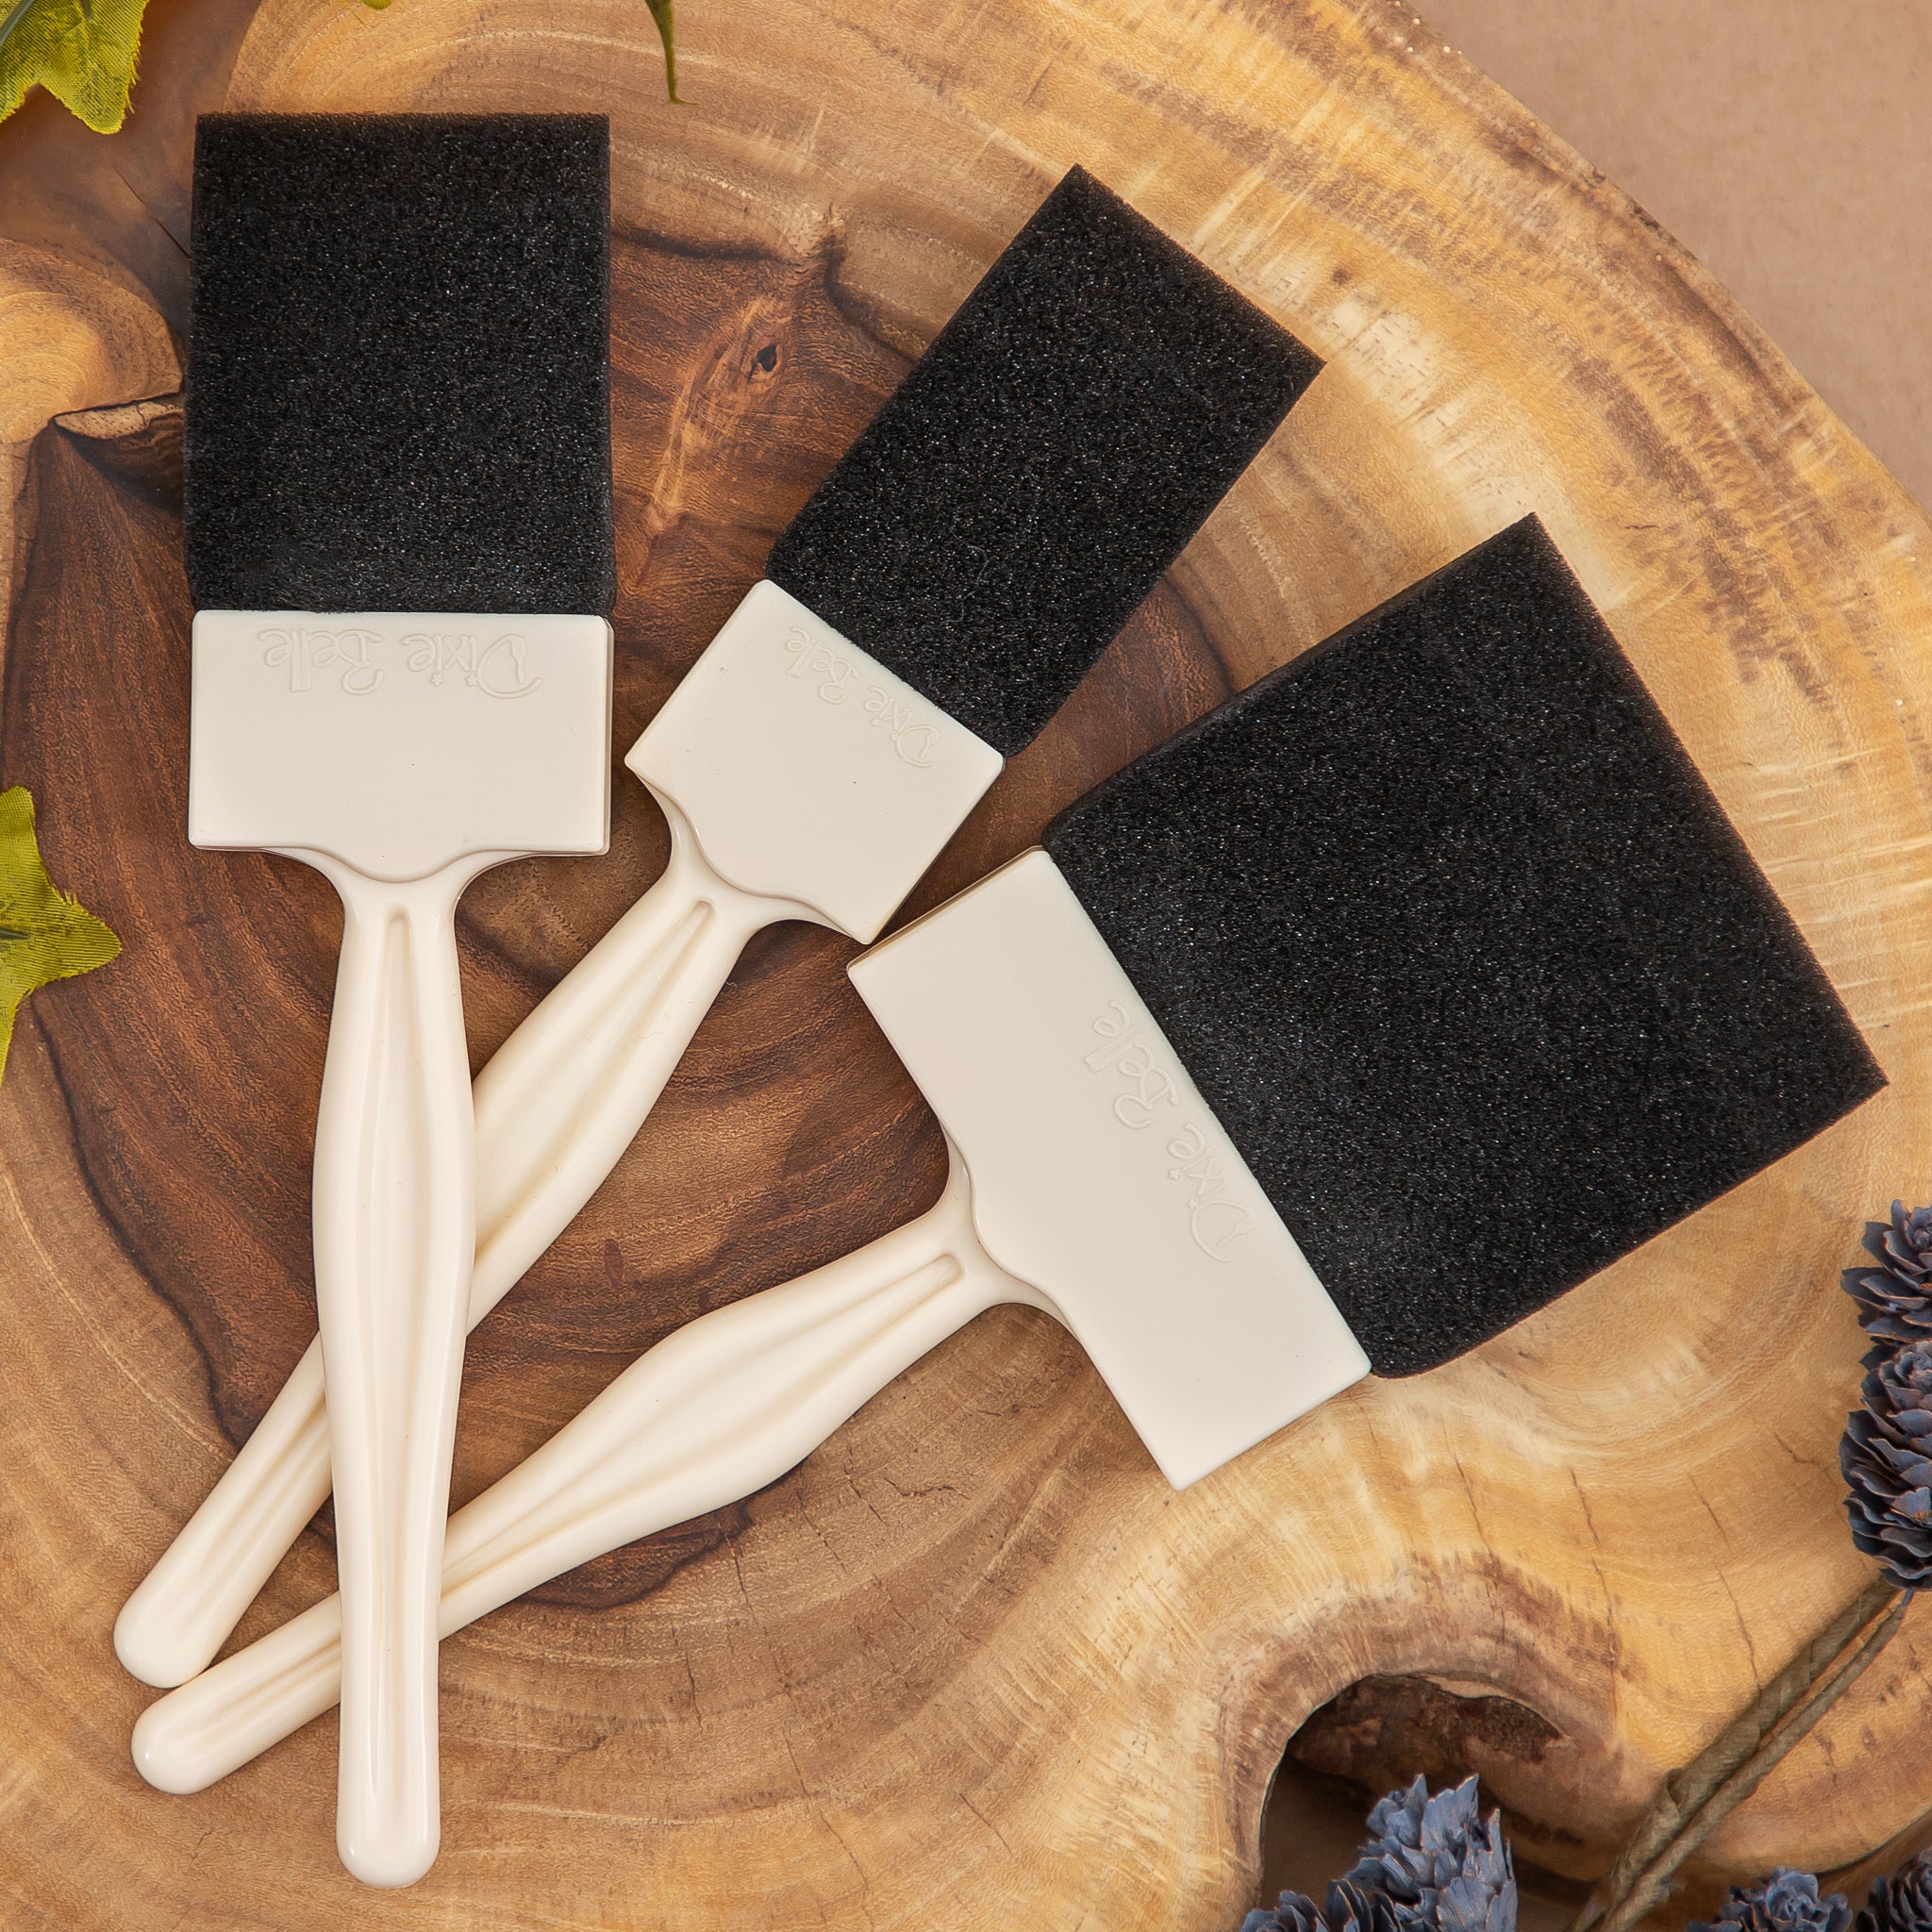 Three foam brushes in varying sizes are laying on a piece of wood.